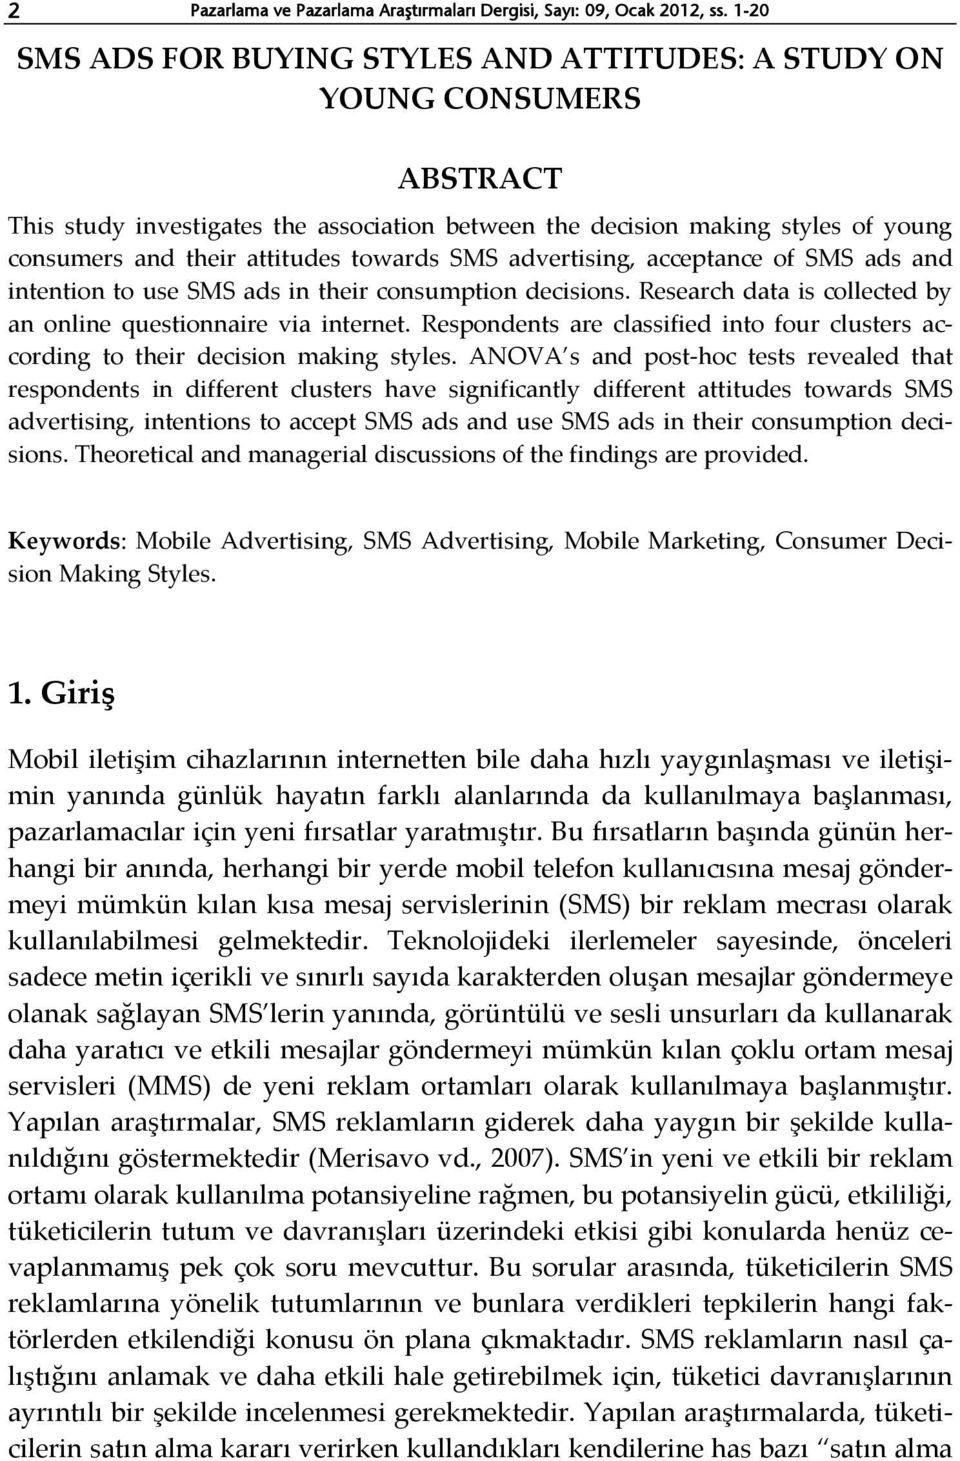 towards SMS advertising, acceptance of SMS ads and intention to use SMS ads in their consumption decisions. Research data is collected by an online questionnaire via internet.